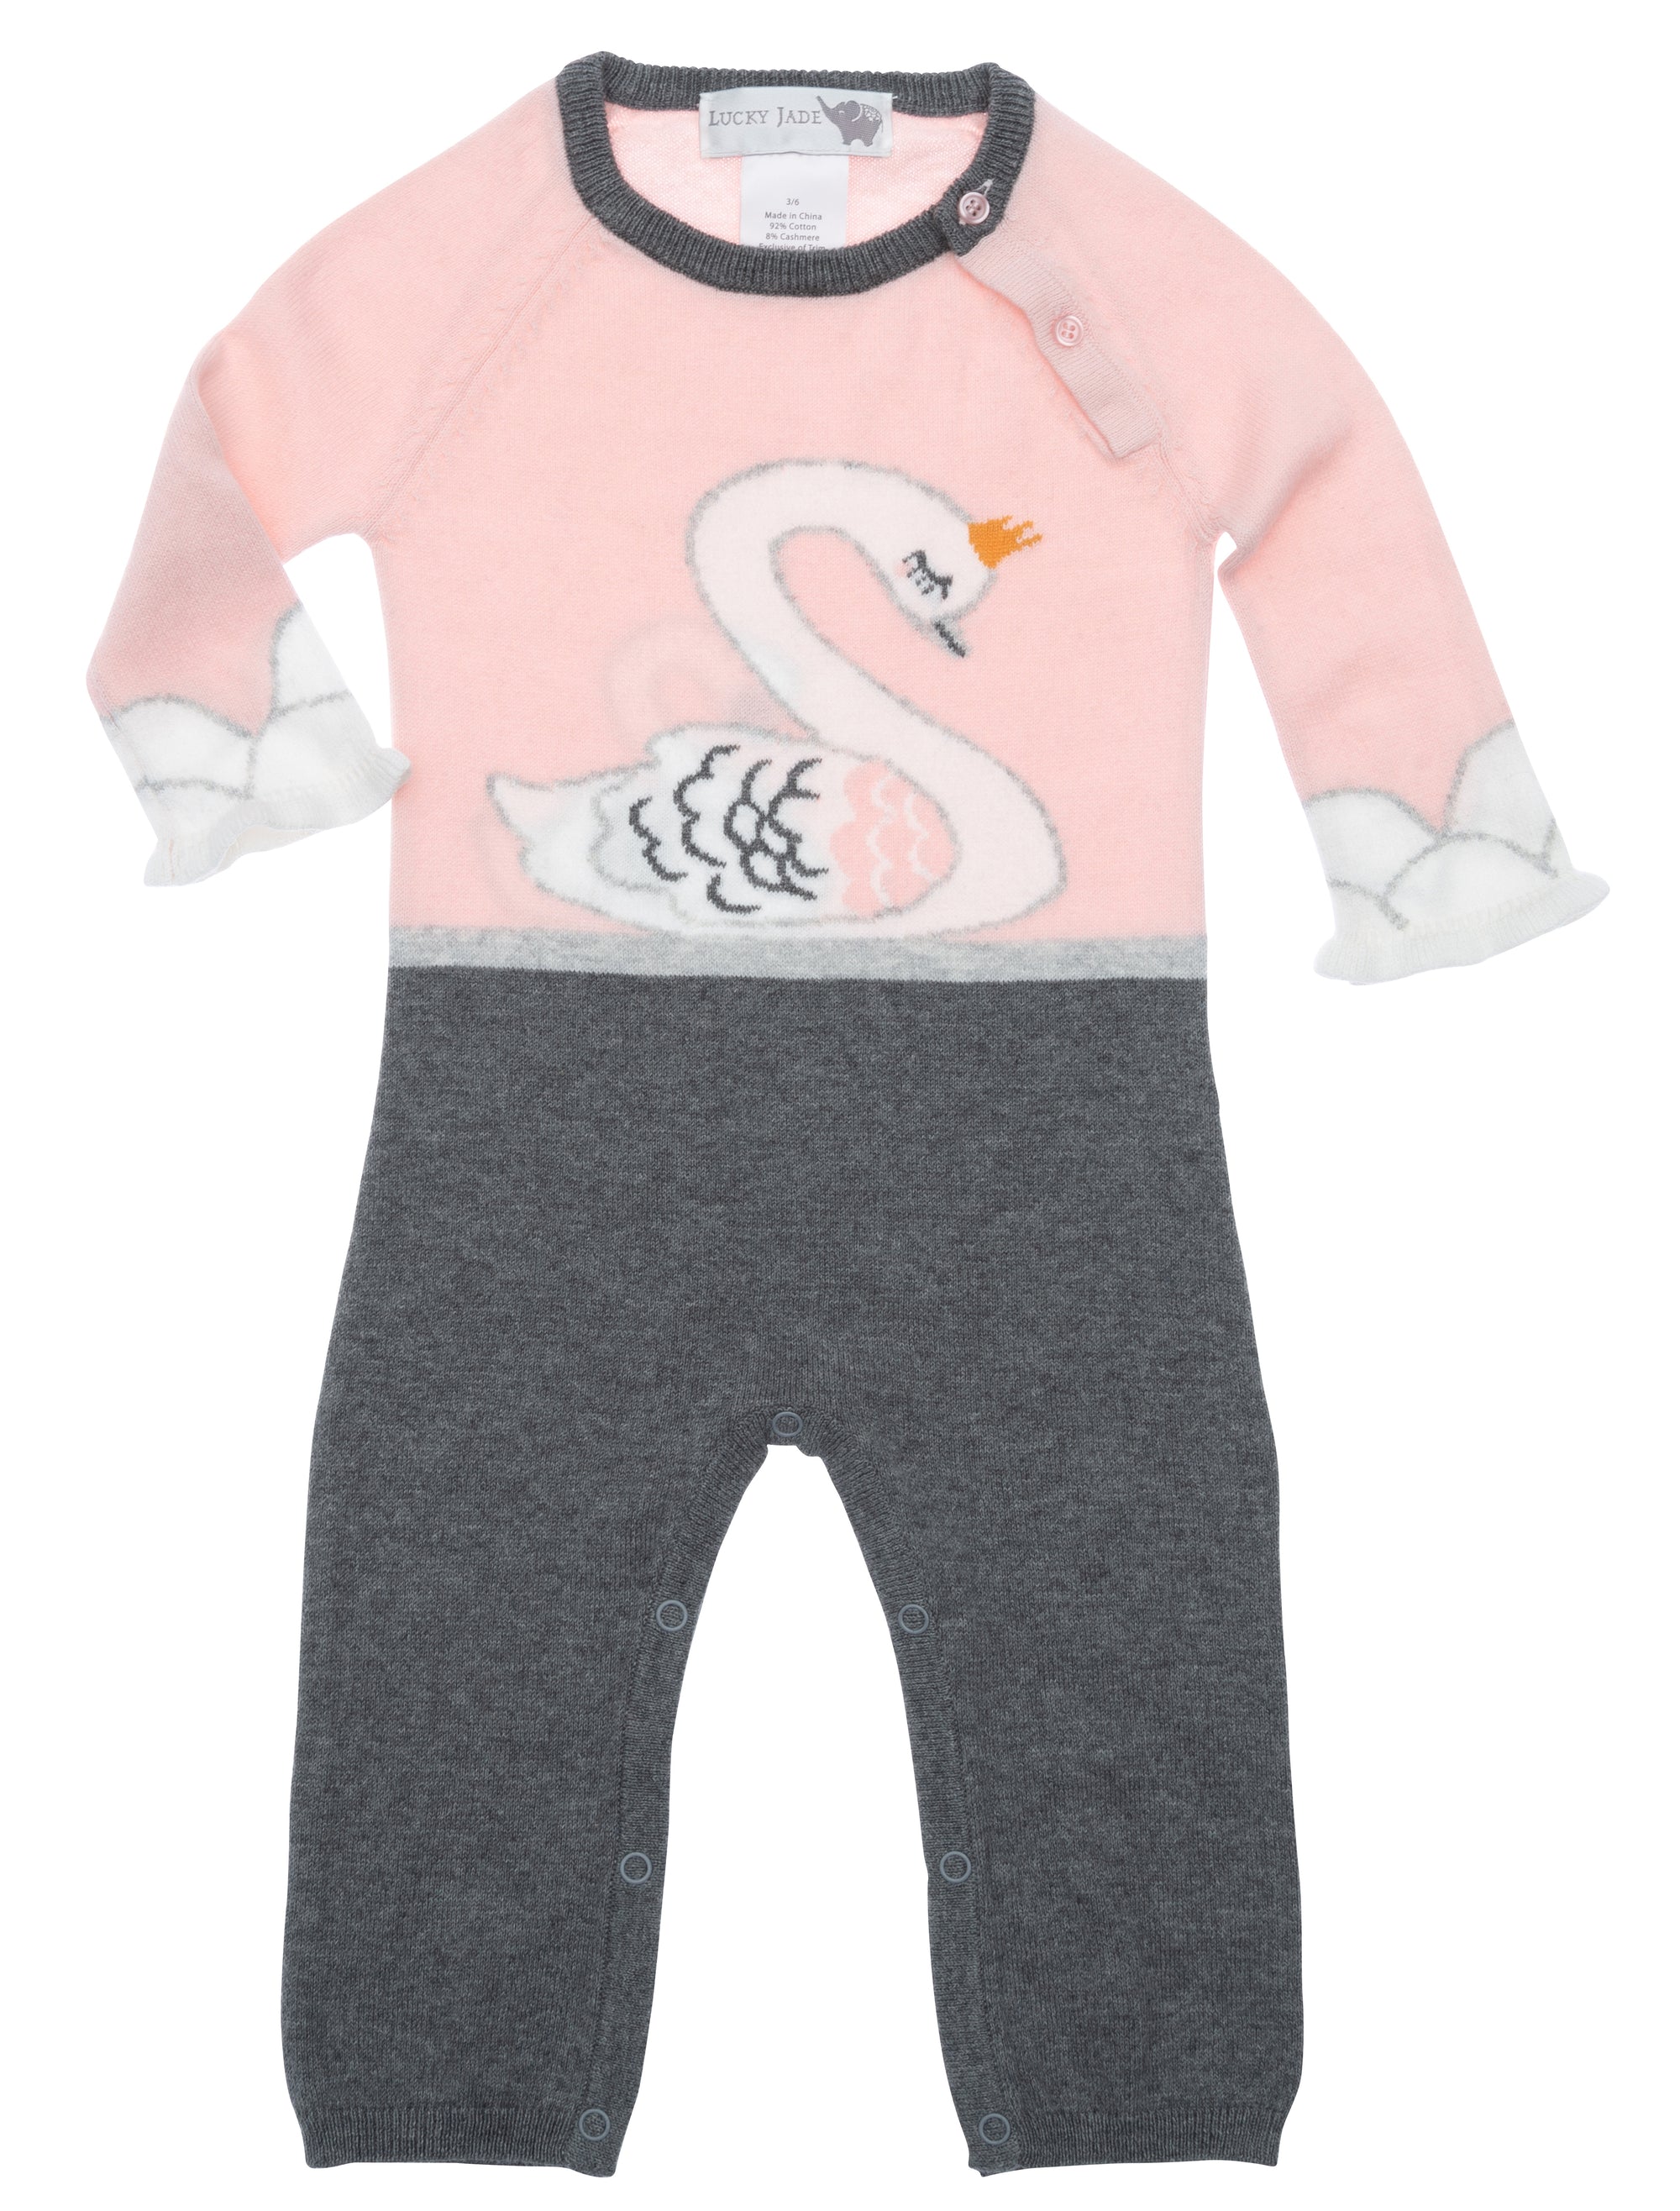 Lucky Jade Kids clothing feature a baby girl coverall with a white swan on the front with  gray pants. swan onesie little girl swan outfit baby girl outfits #luckyjadekids #kidsclothingboutique #babyoutifts #kidsclothes #matchingdresses